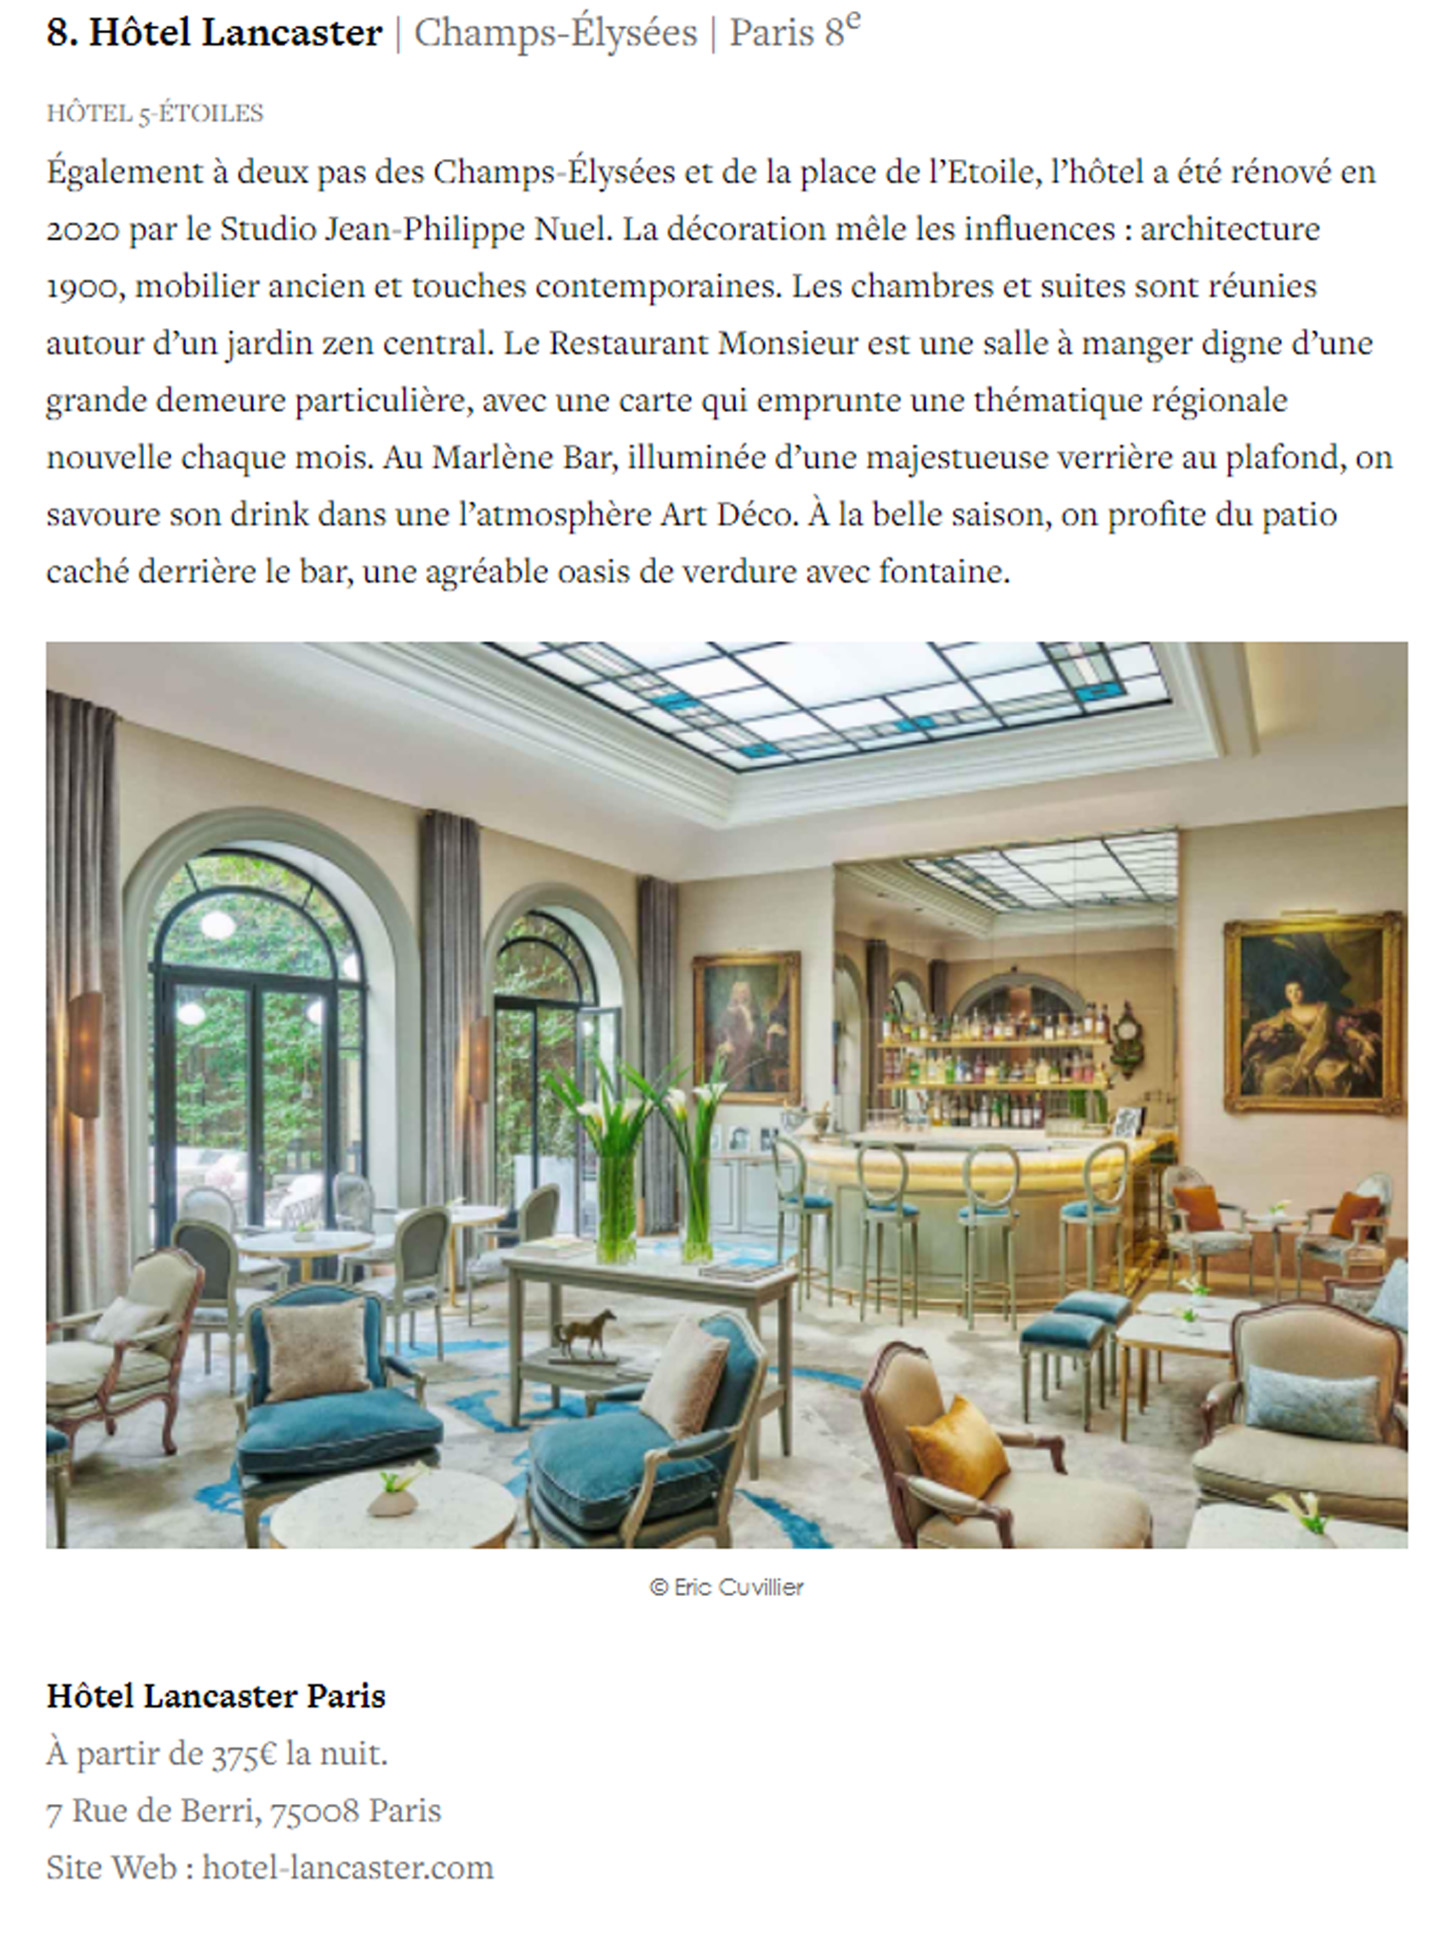 Article on the projects of the studio jean-philippe nuel in the magazine yonder and on the success of the 5 star Lancaster hotel in Paris